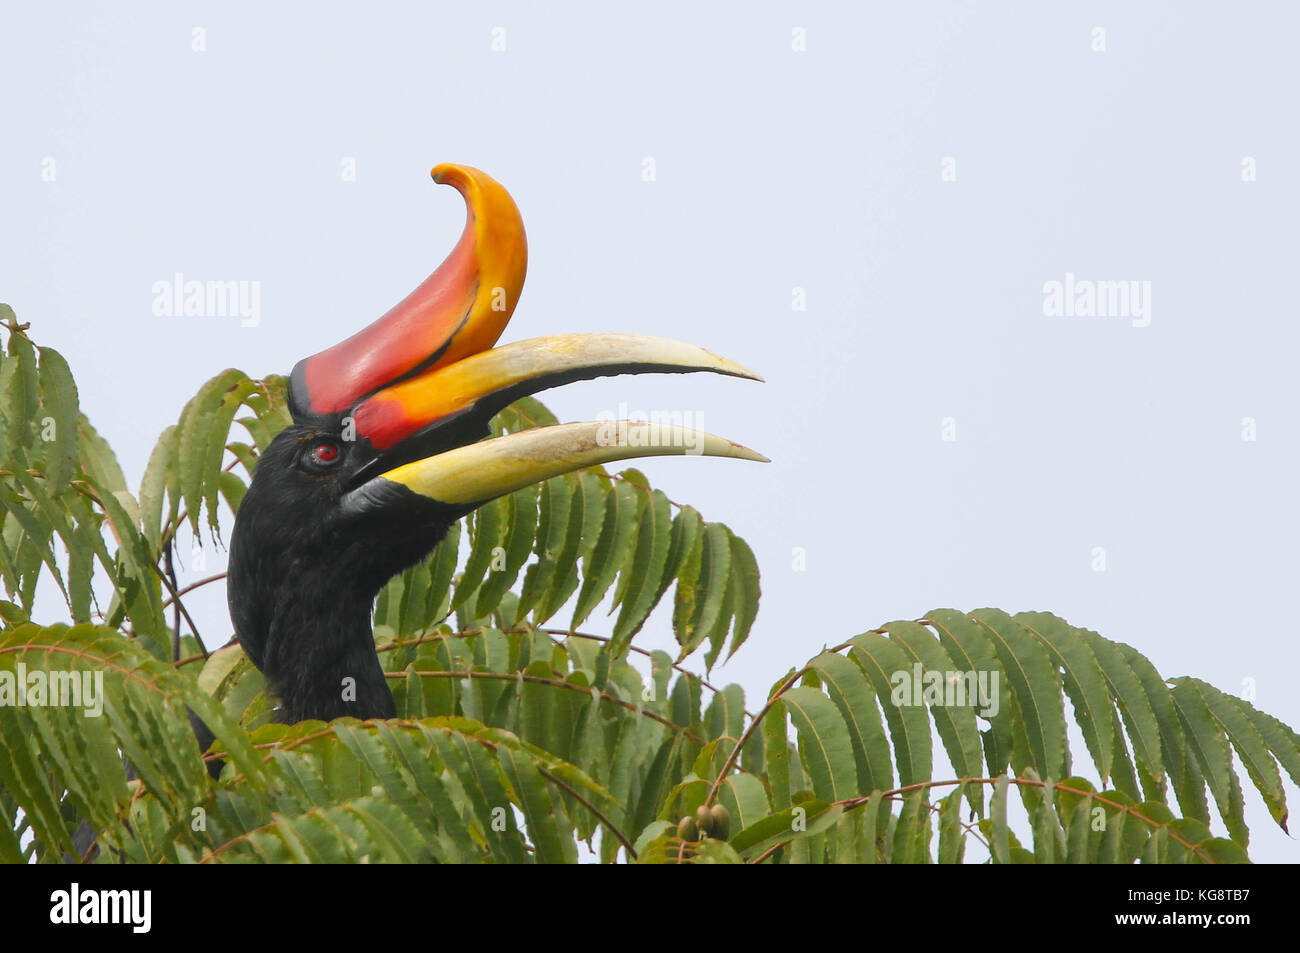 A Rhinoceros Hornbill in the treetops in the Genting Highlands, Malaysia Stock Photo